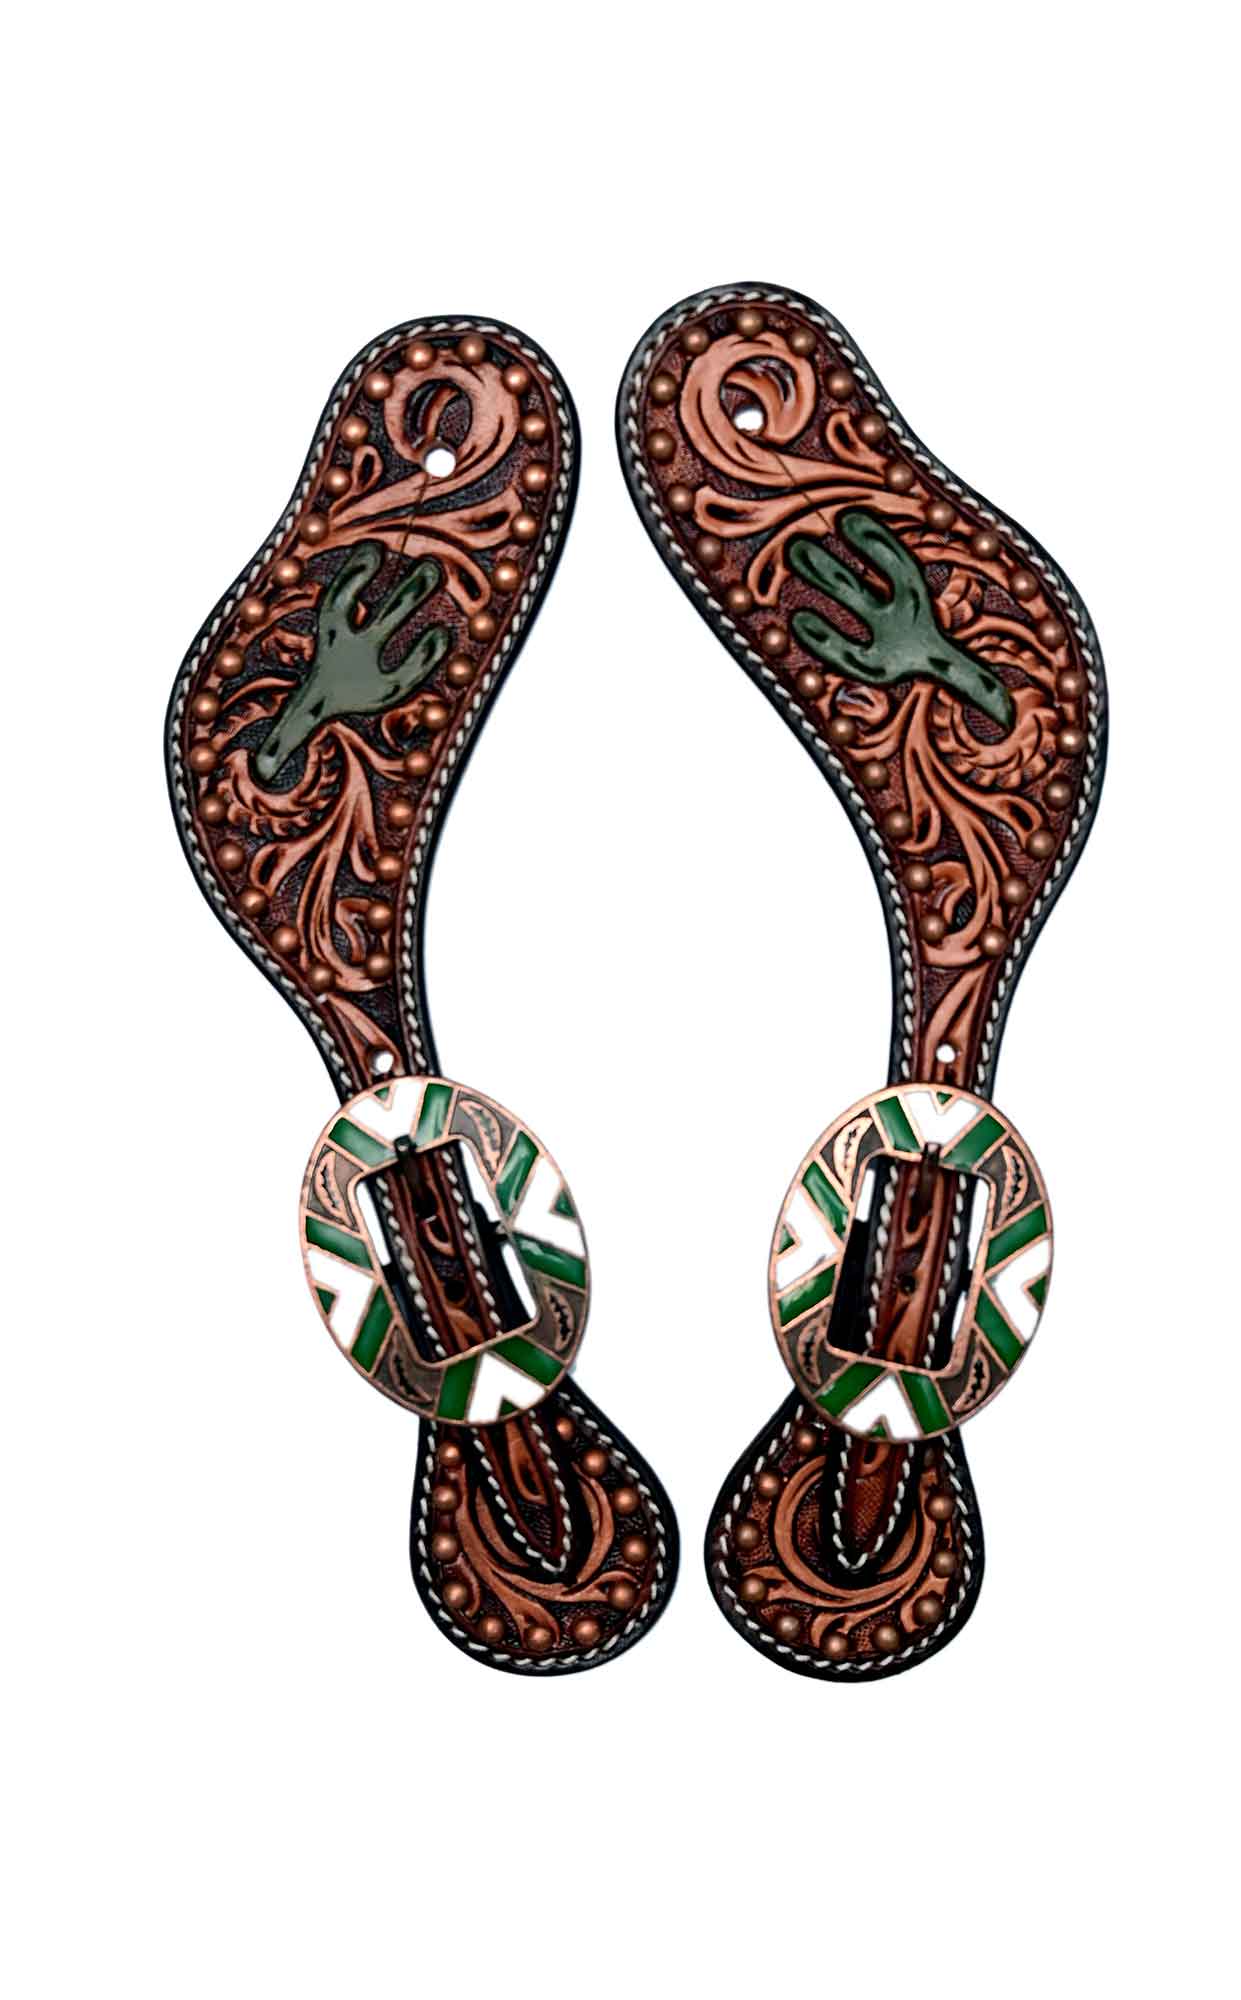 Black Hoof| Cactus | Floral Tooled Leather Spur Straps with Copper spots |Green And White  Enameled Buckle|for Horse Riders | Western Men, Women, Adjustable Single Ply Spur Straps | Equestrian Accessories